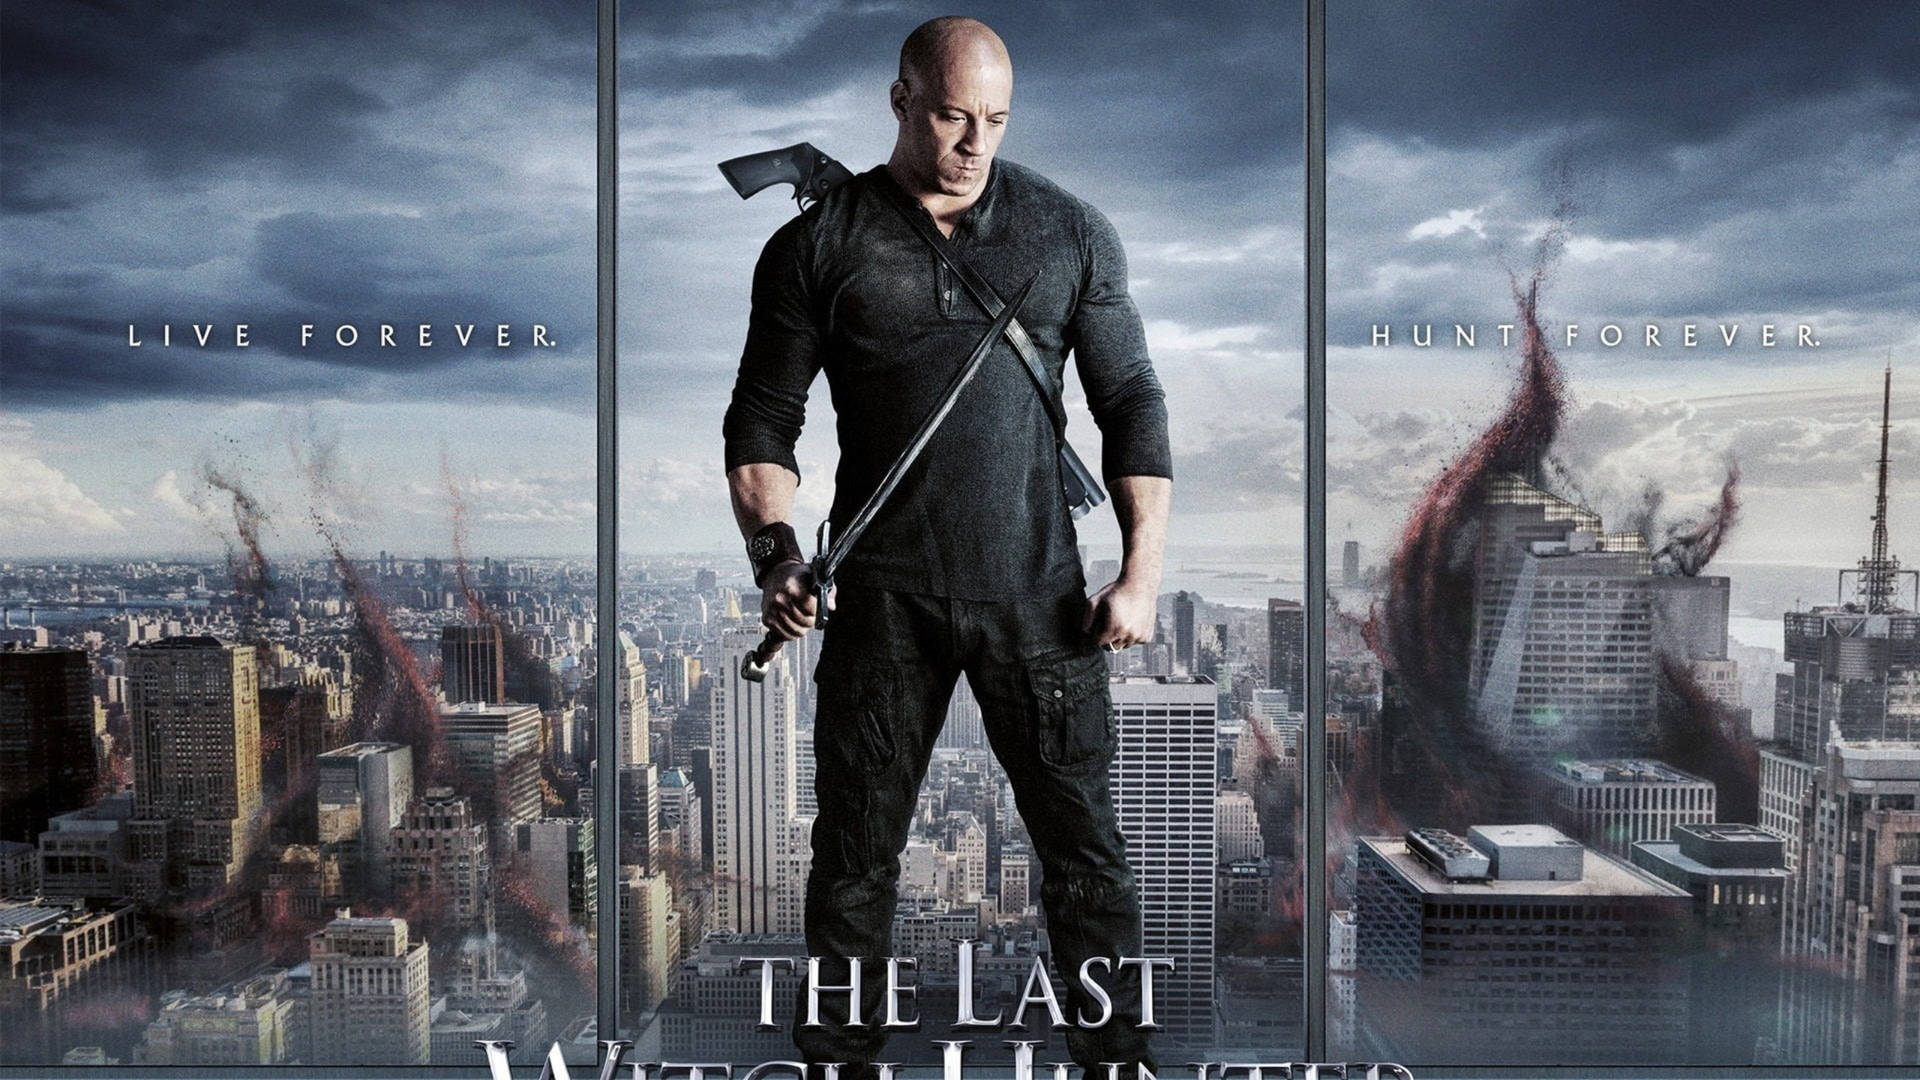 The Epic Witch Hunter from "The Last Witch Hunter" Wallpaper